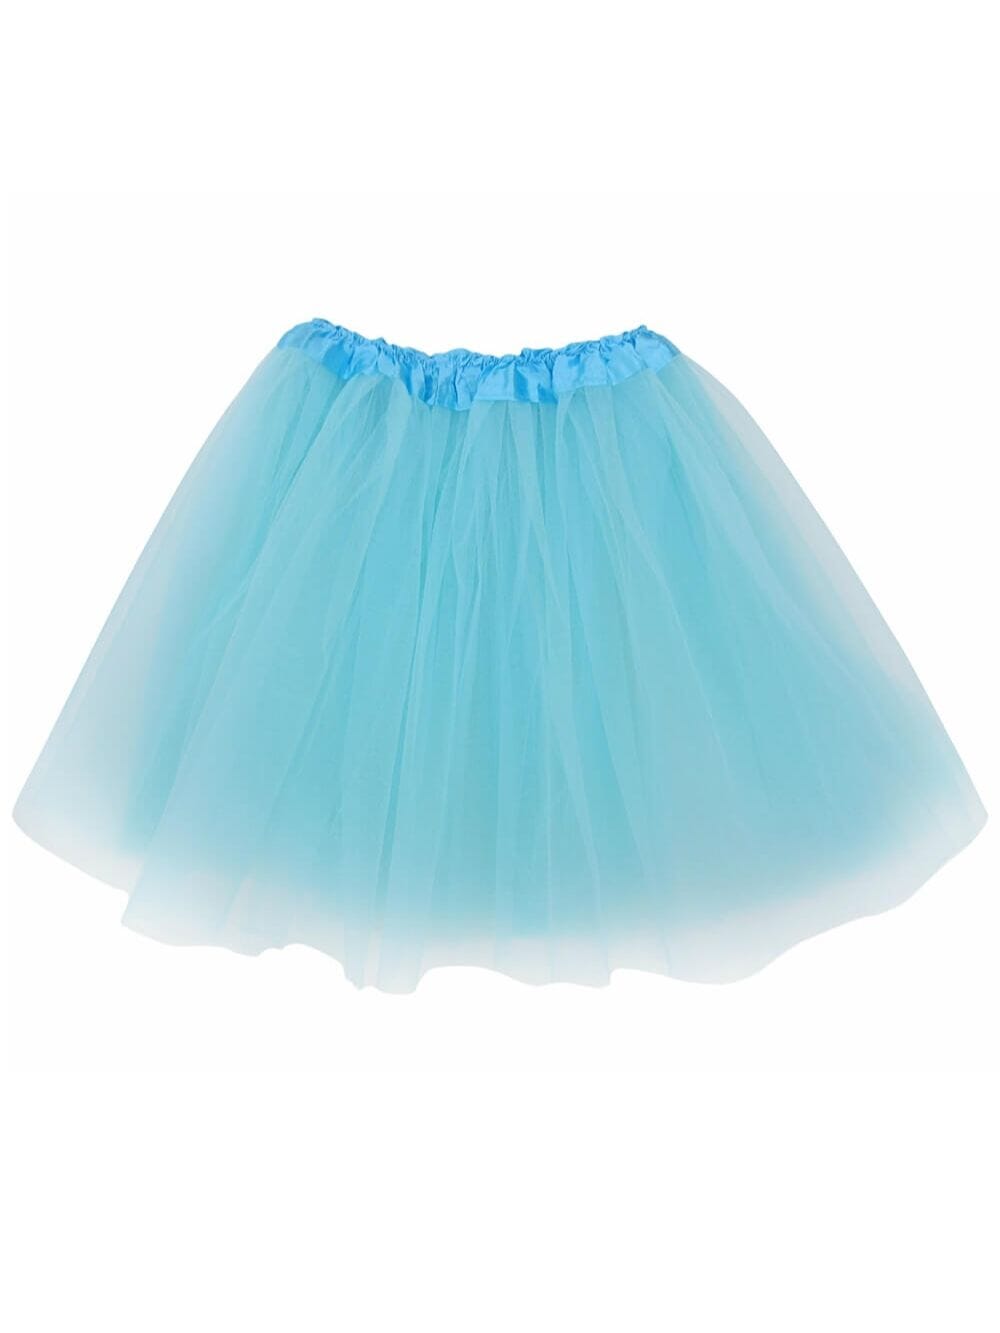 Sydney So Sweet Size Chart and Tutu Skirt Measuring Guides